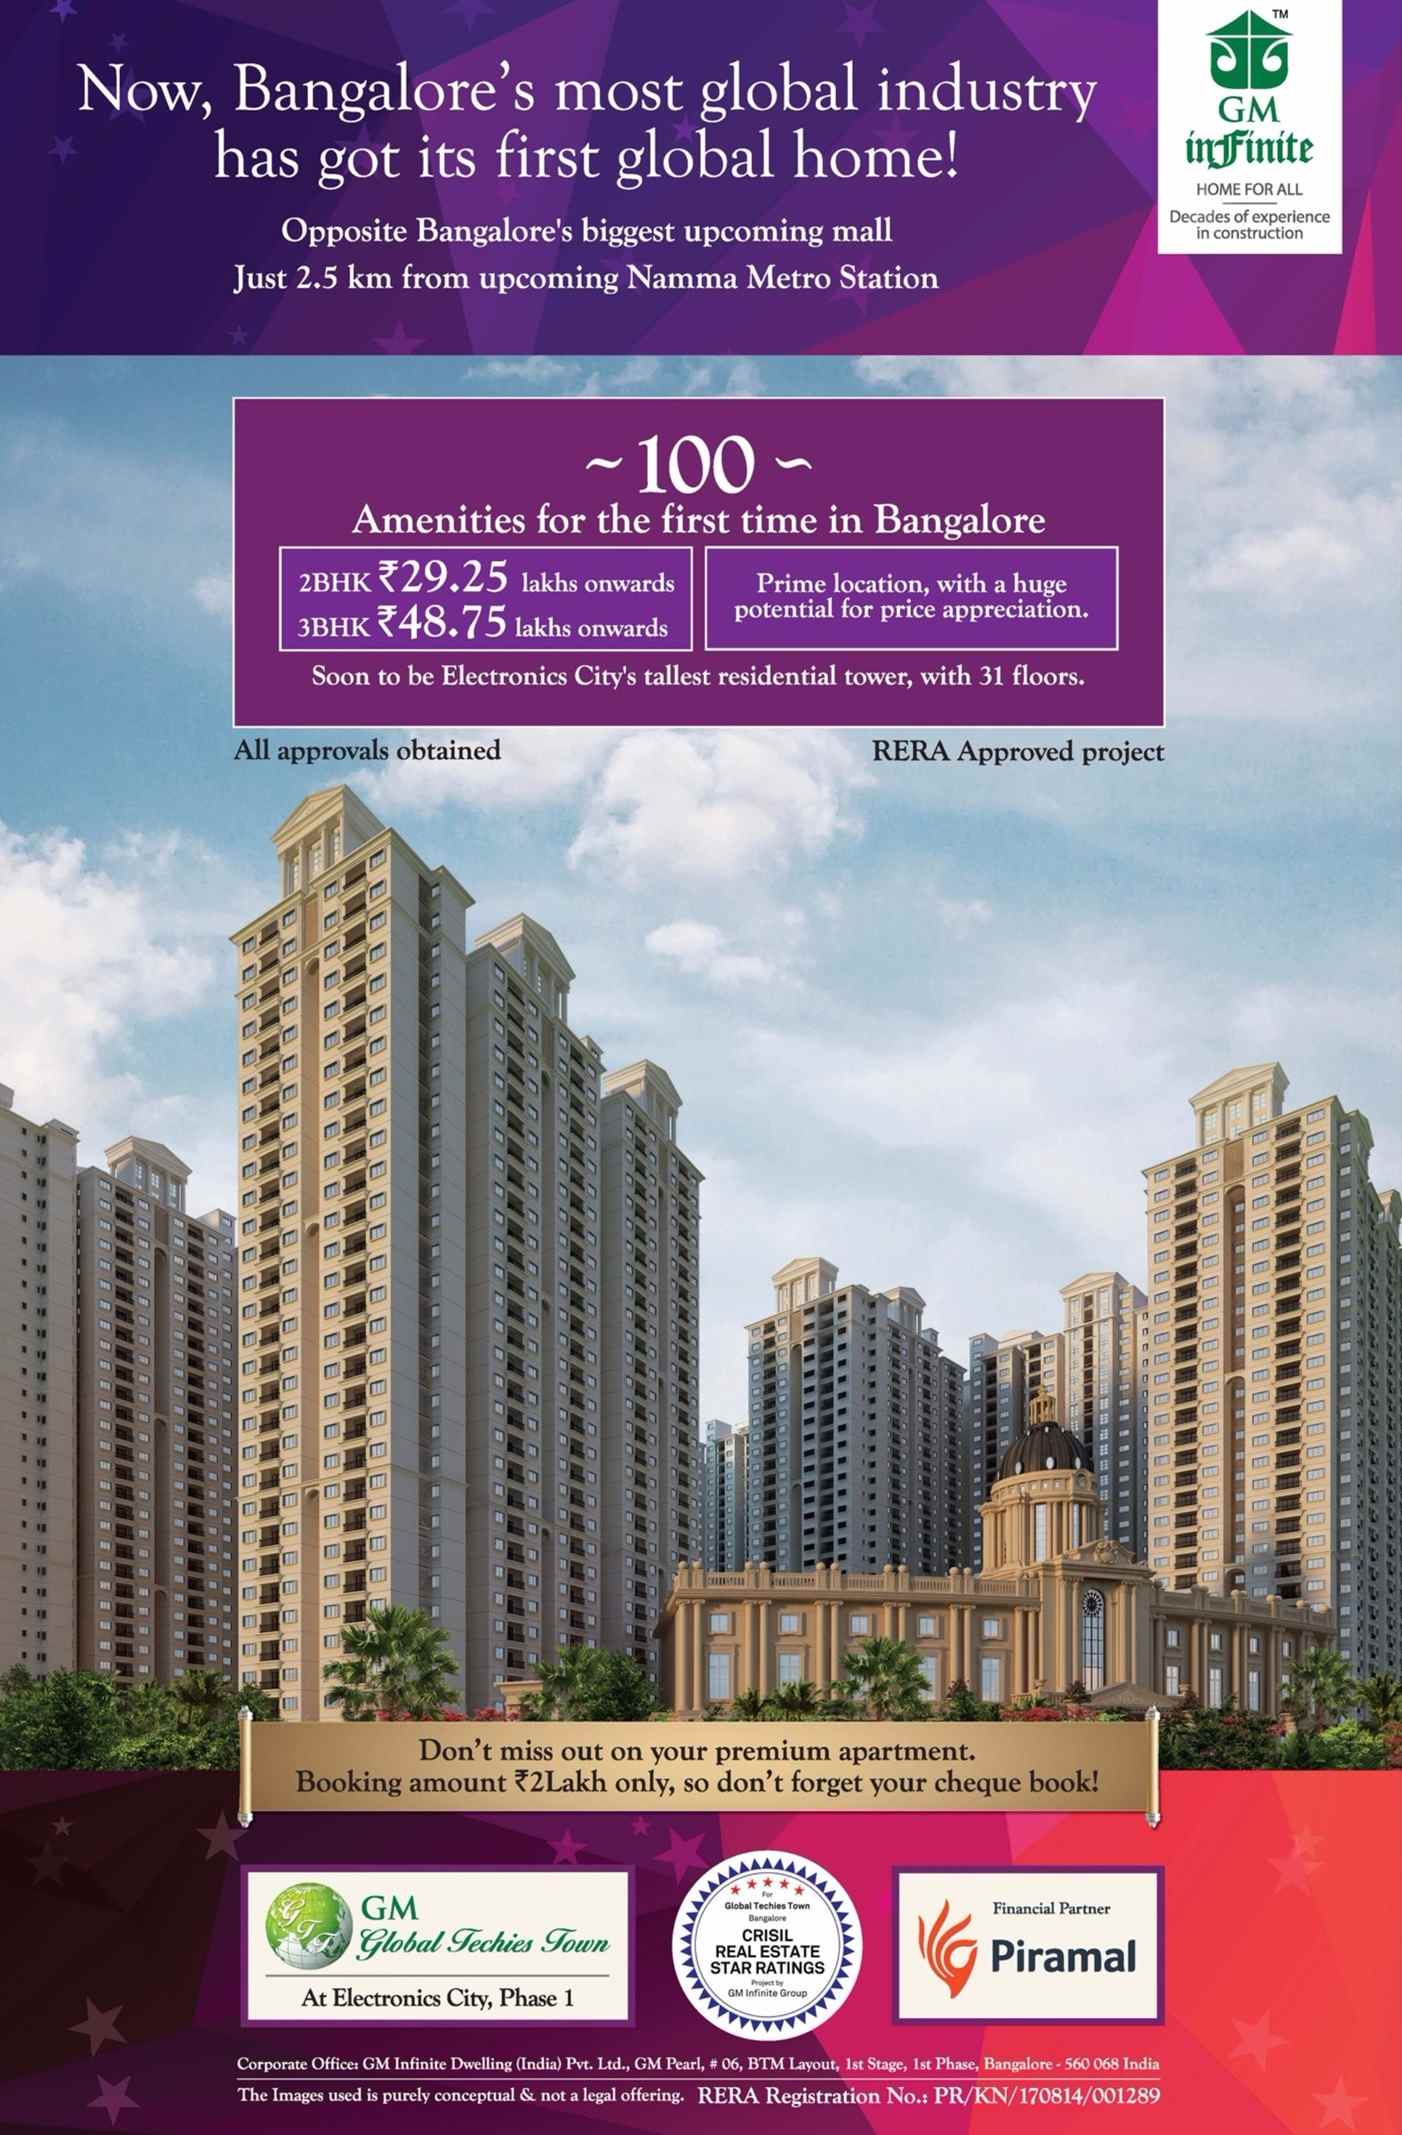 Experience 100 amenities for the first time at GM Global Techies Town in Bangalore Update